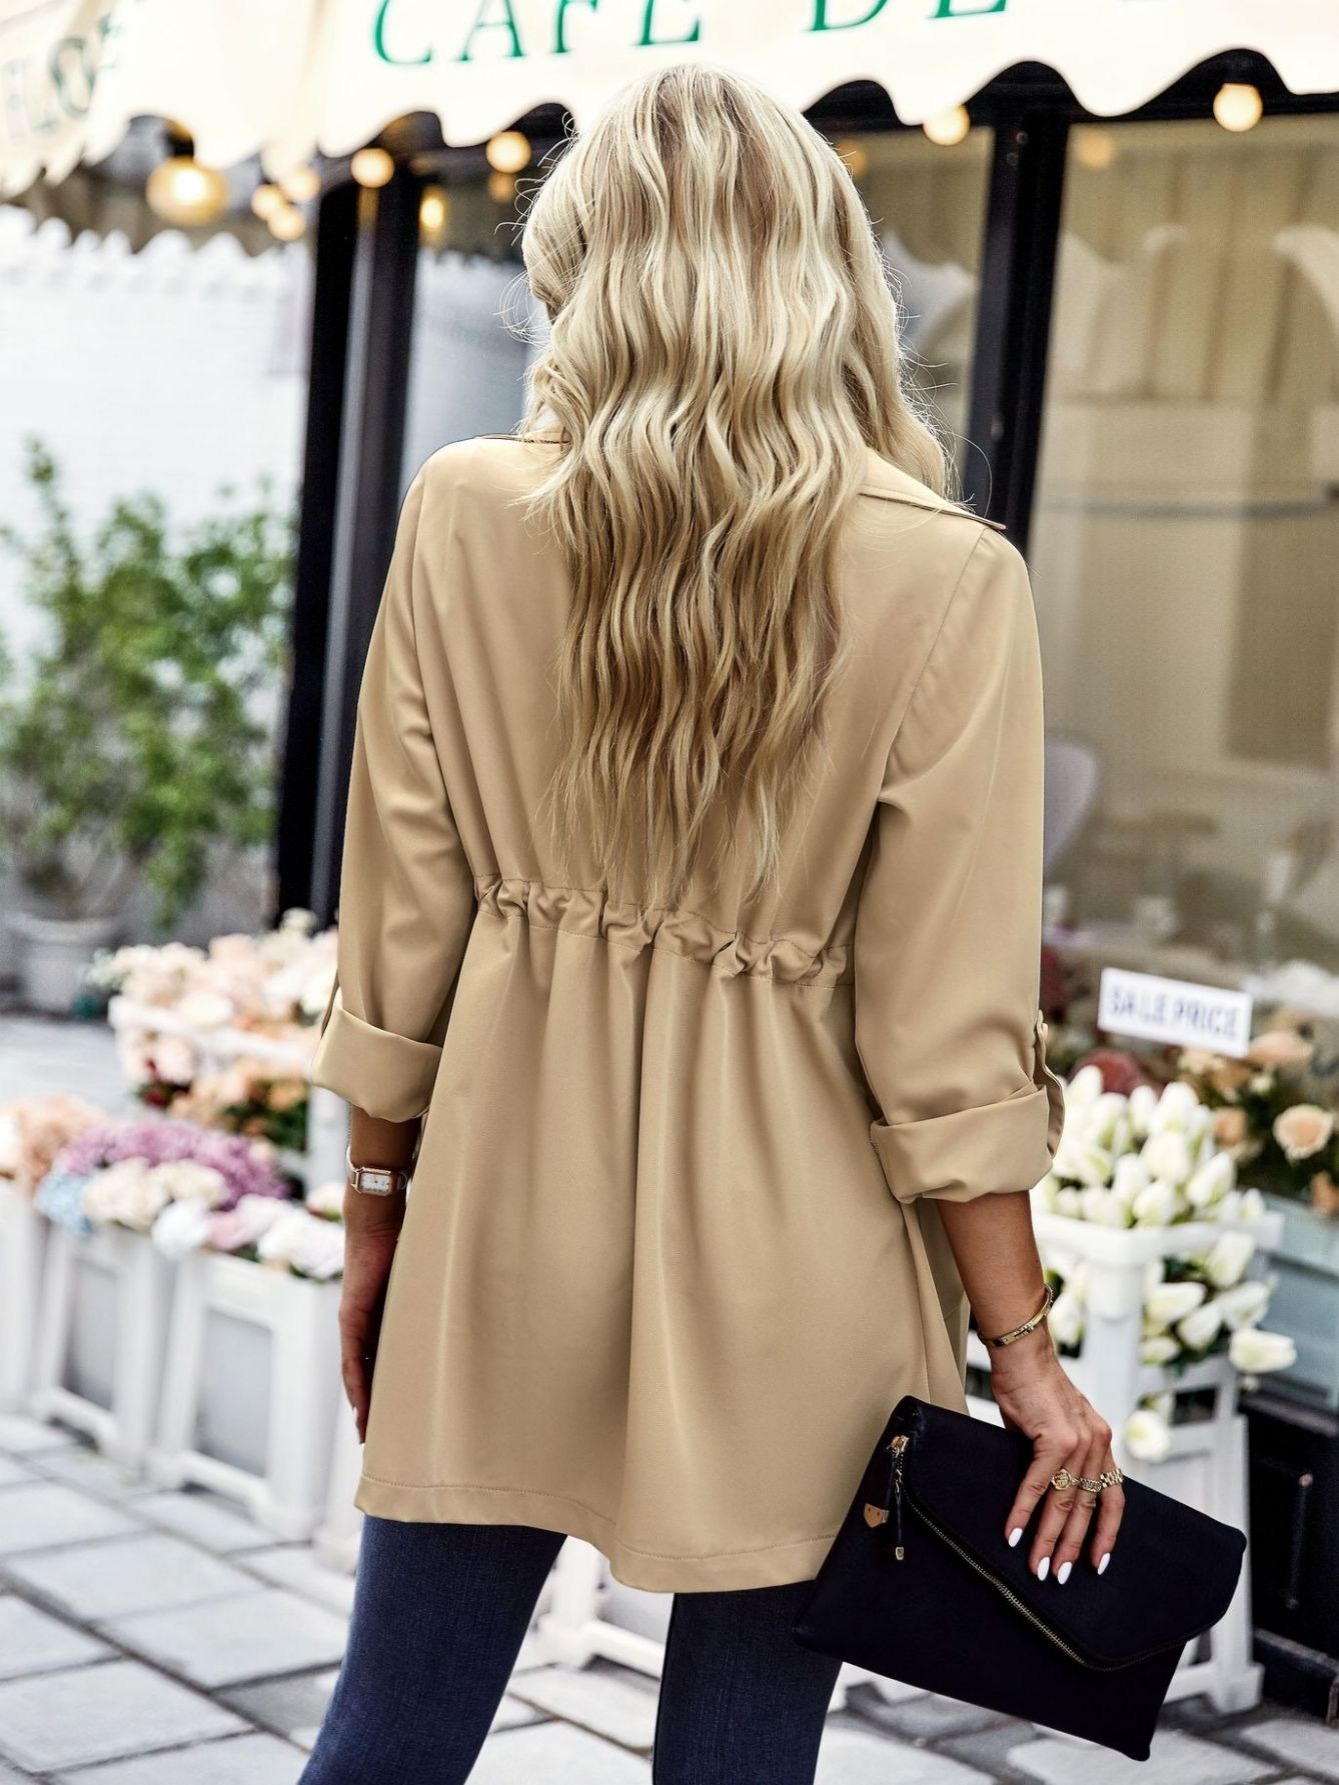 Clearance Clothes Under $5.00 Women's Jacket Coat Long Sleeve